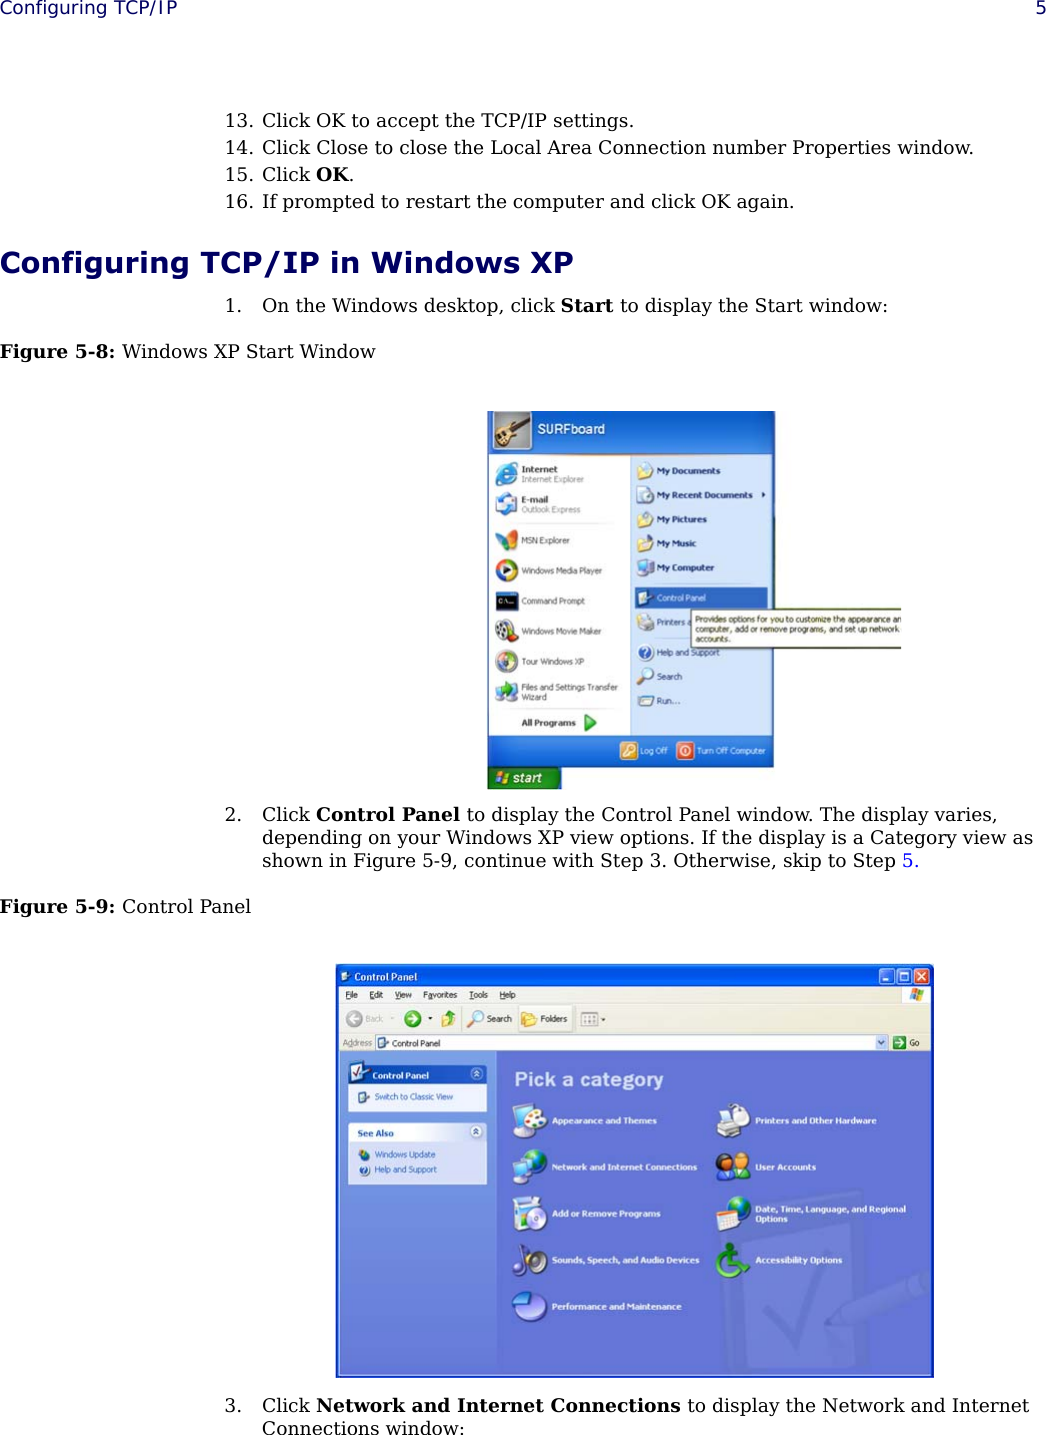  Configuring TCP/IP 513. Click OK to accept the TCP/IP settings.14. Click Close to close the Local Area Connection number Properties window.15. Click OK.16. If prompted to restart the computer and click OK again.Configuring TCP/IP in Windows XP1. On the Windows desktop, click Start to display the Start window:Figure 5-8: Windows XP Start Window2. Click Control Panel to display the Control Panel window. The display varies, depending on your Windows XP view options. If the display is a Category view as shown in Figure 5-9, continue with Step 3. Otherwise, skip to Step 5.Figure 5-9: Control Panel3. Click Network and Internet Connections to display the Network and Internet Connections window: